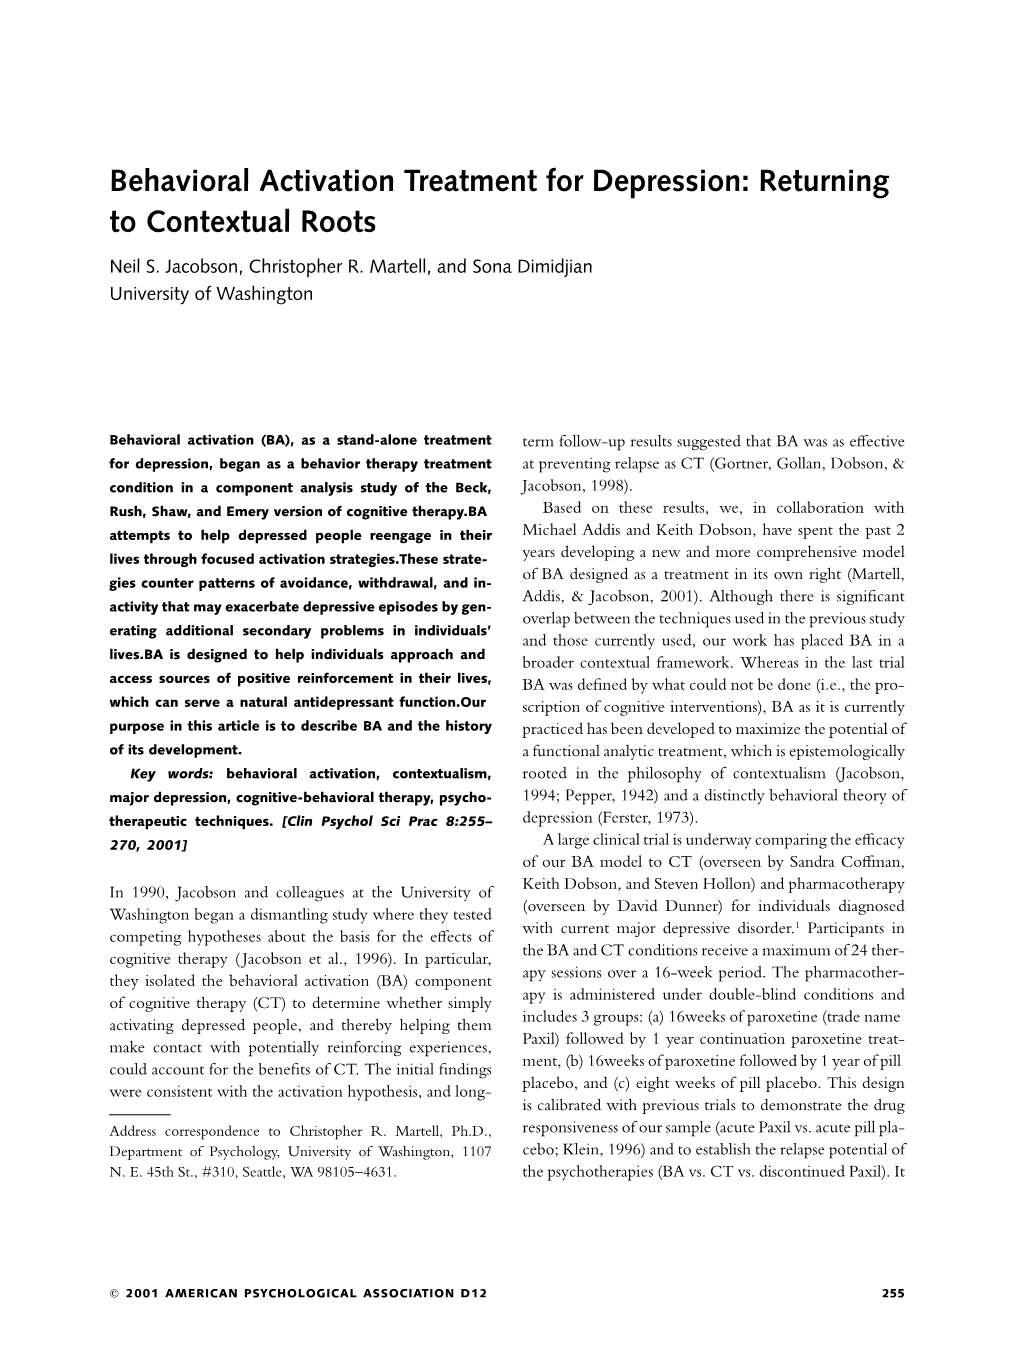 Behavioral Activation Treatment for Depression: Returning to Contextual Roots